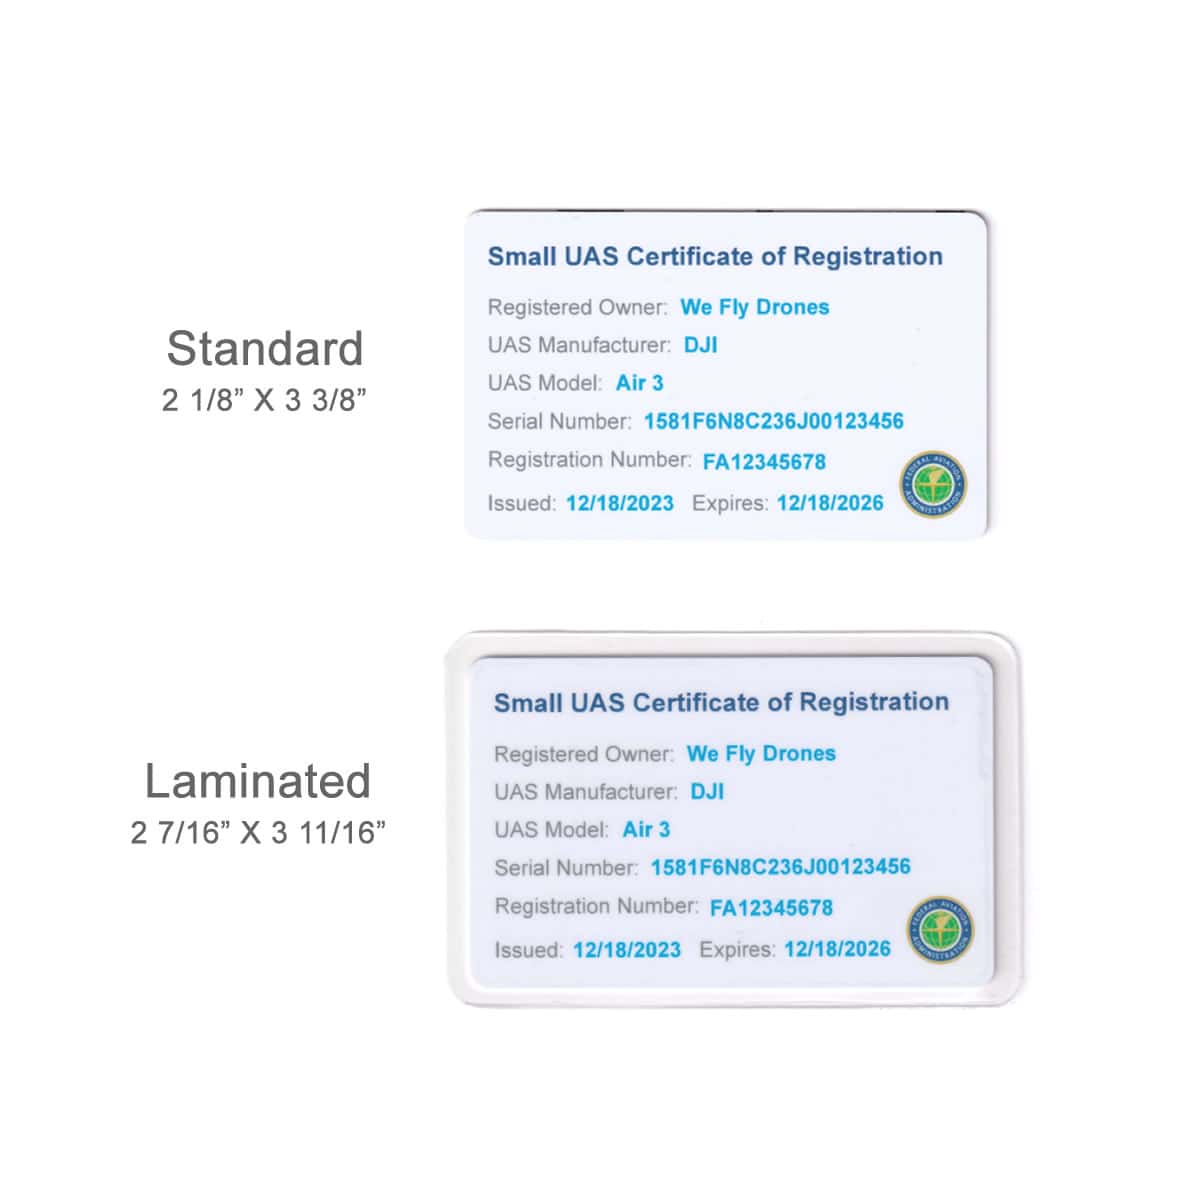 Laminated and non-laminated FAA UAS Certificate cards